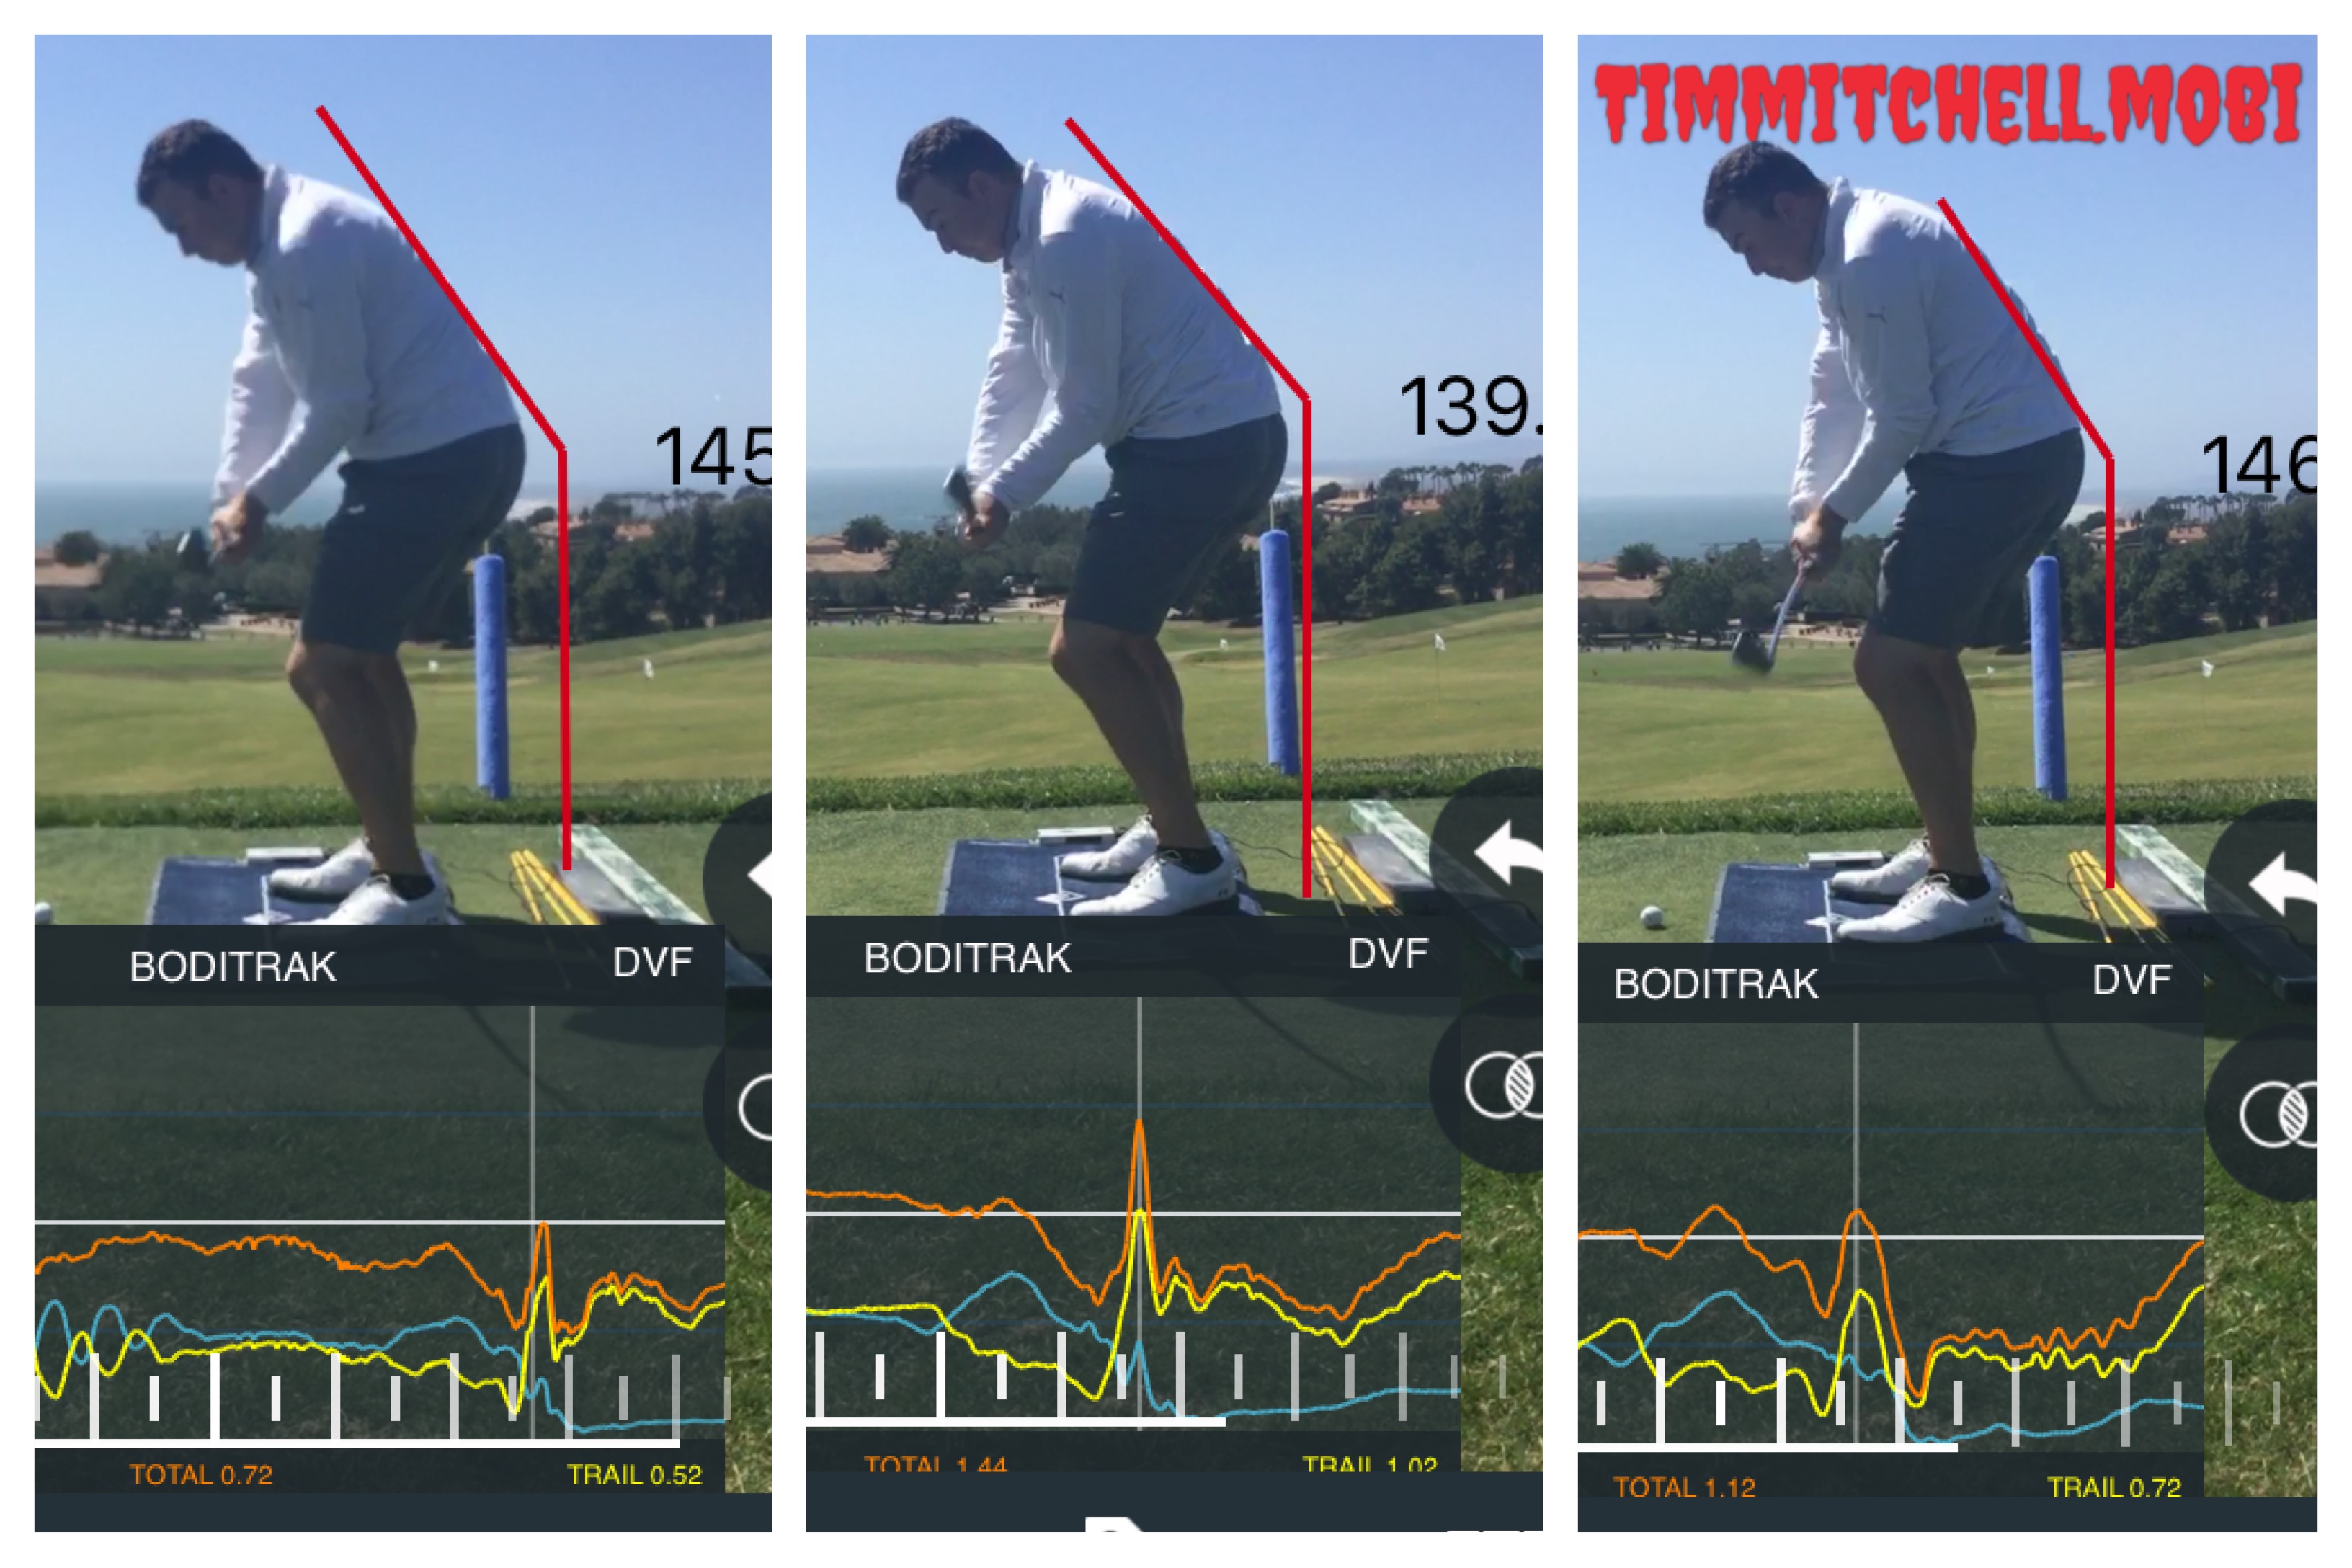 How changing your stance can unlock more distance – GolfWRX